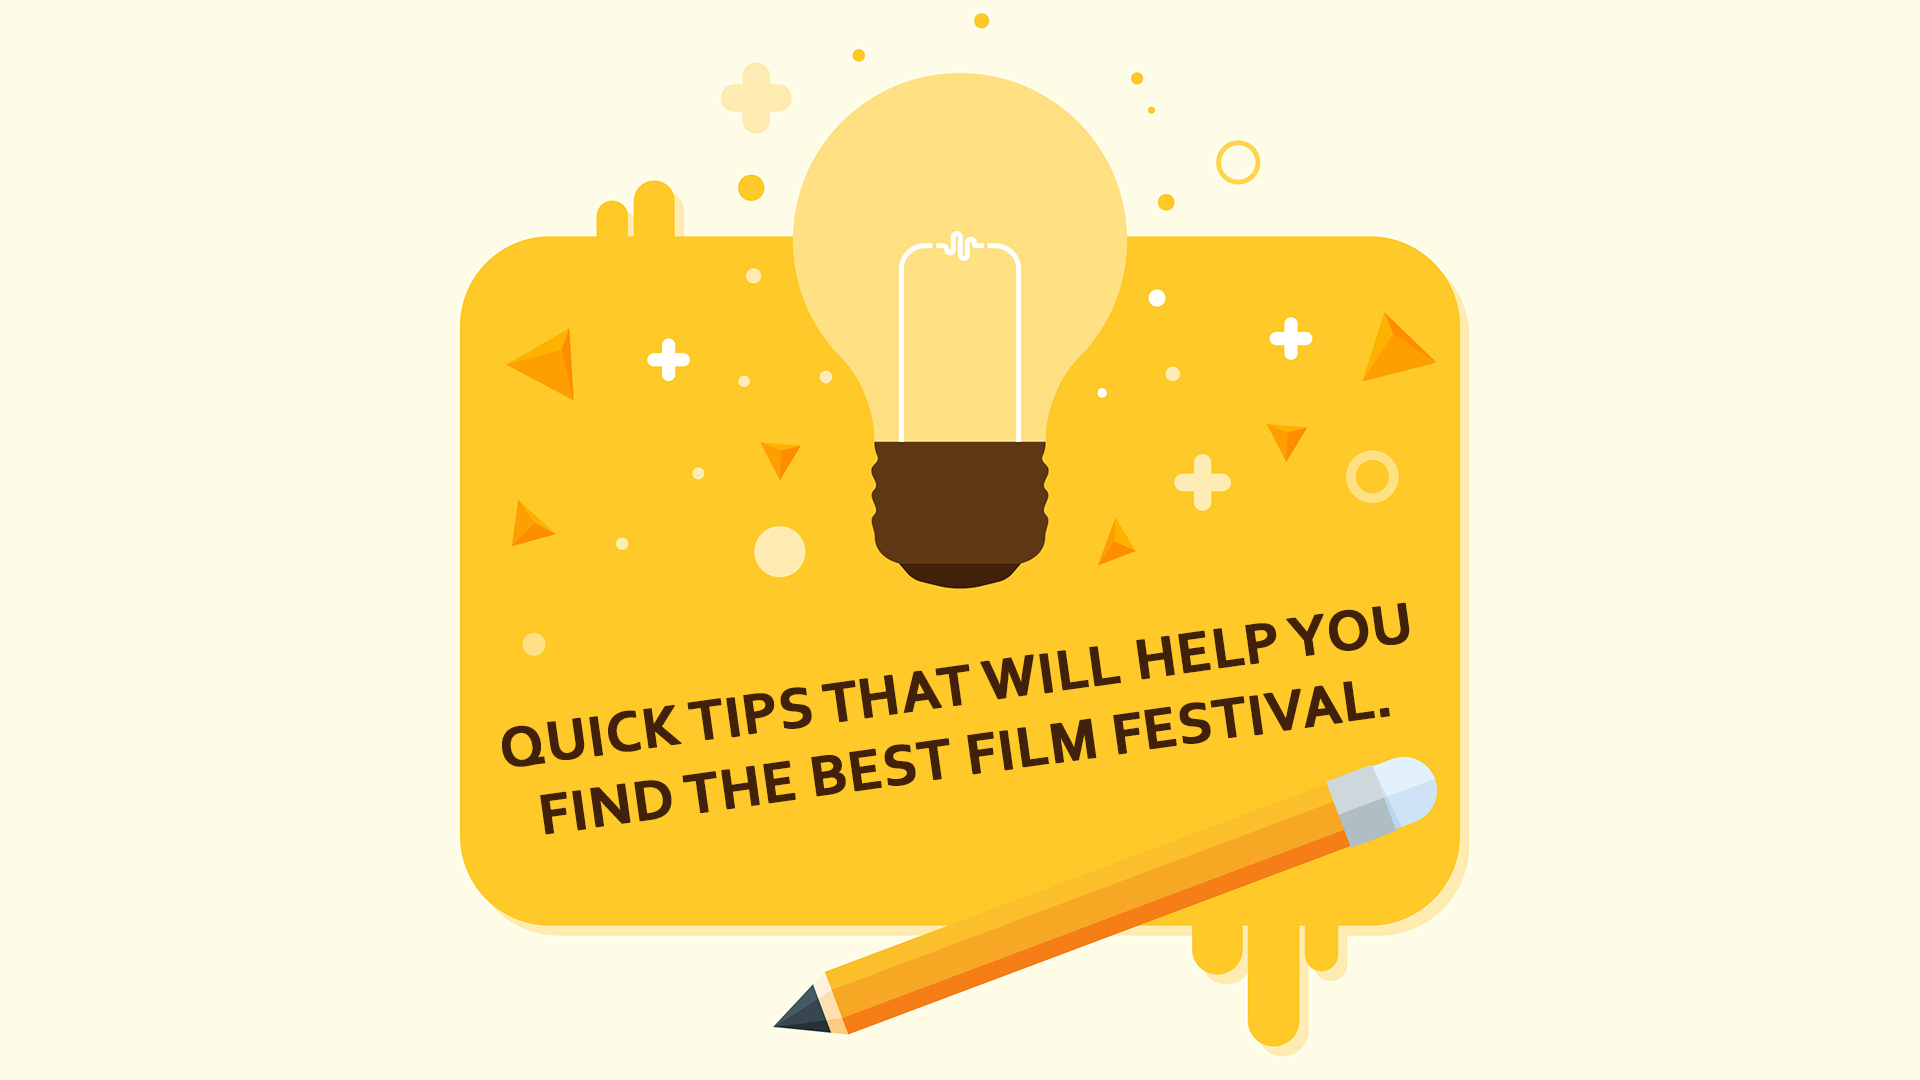 Quick tips that will help you find the Best Film Festival